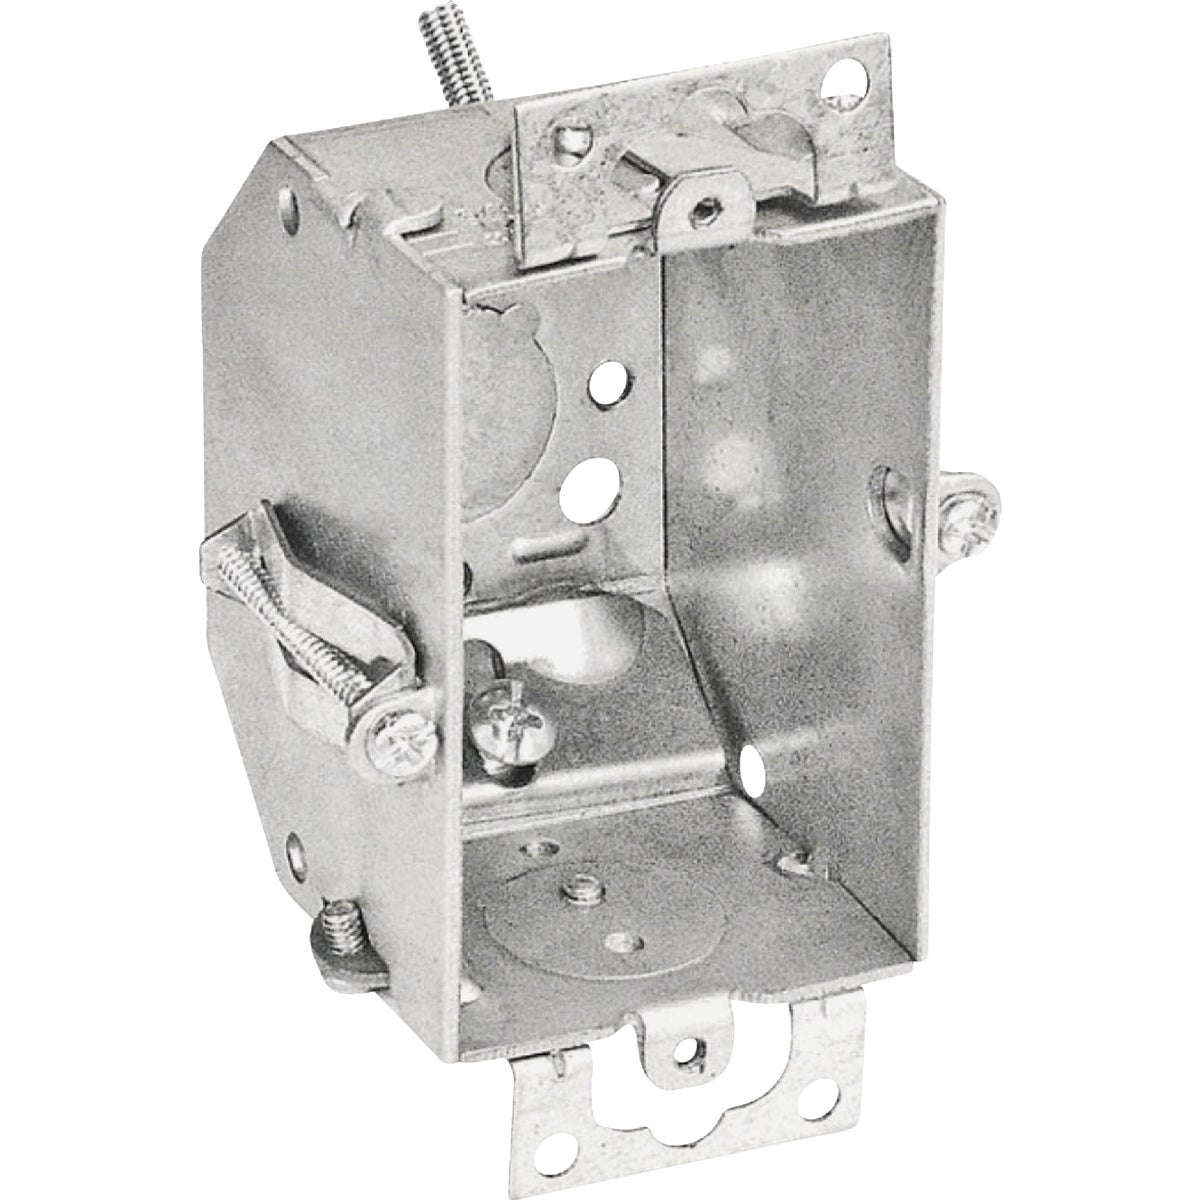 Item 507589, Beveled switch boxes used to support toggle switches, duplex devices, 